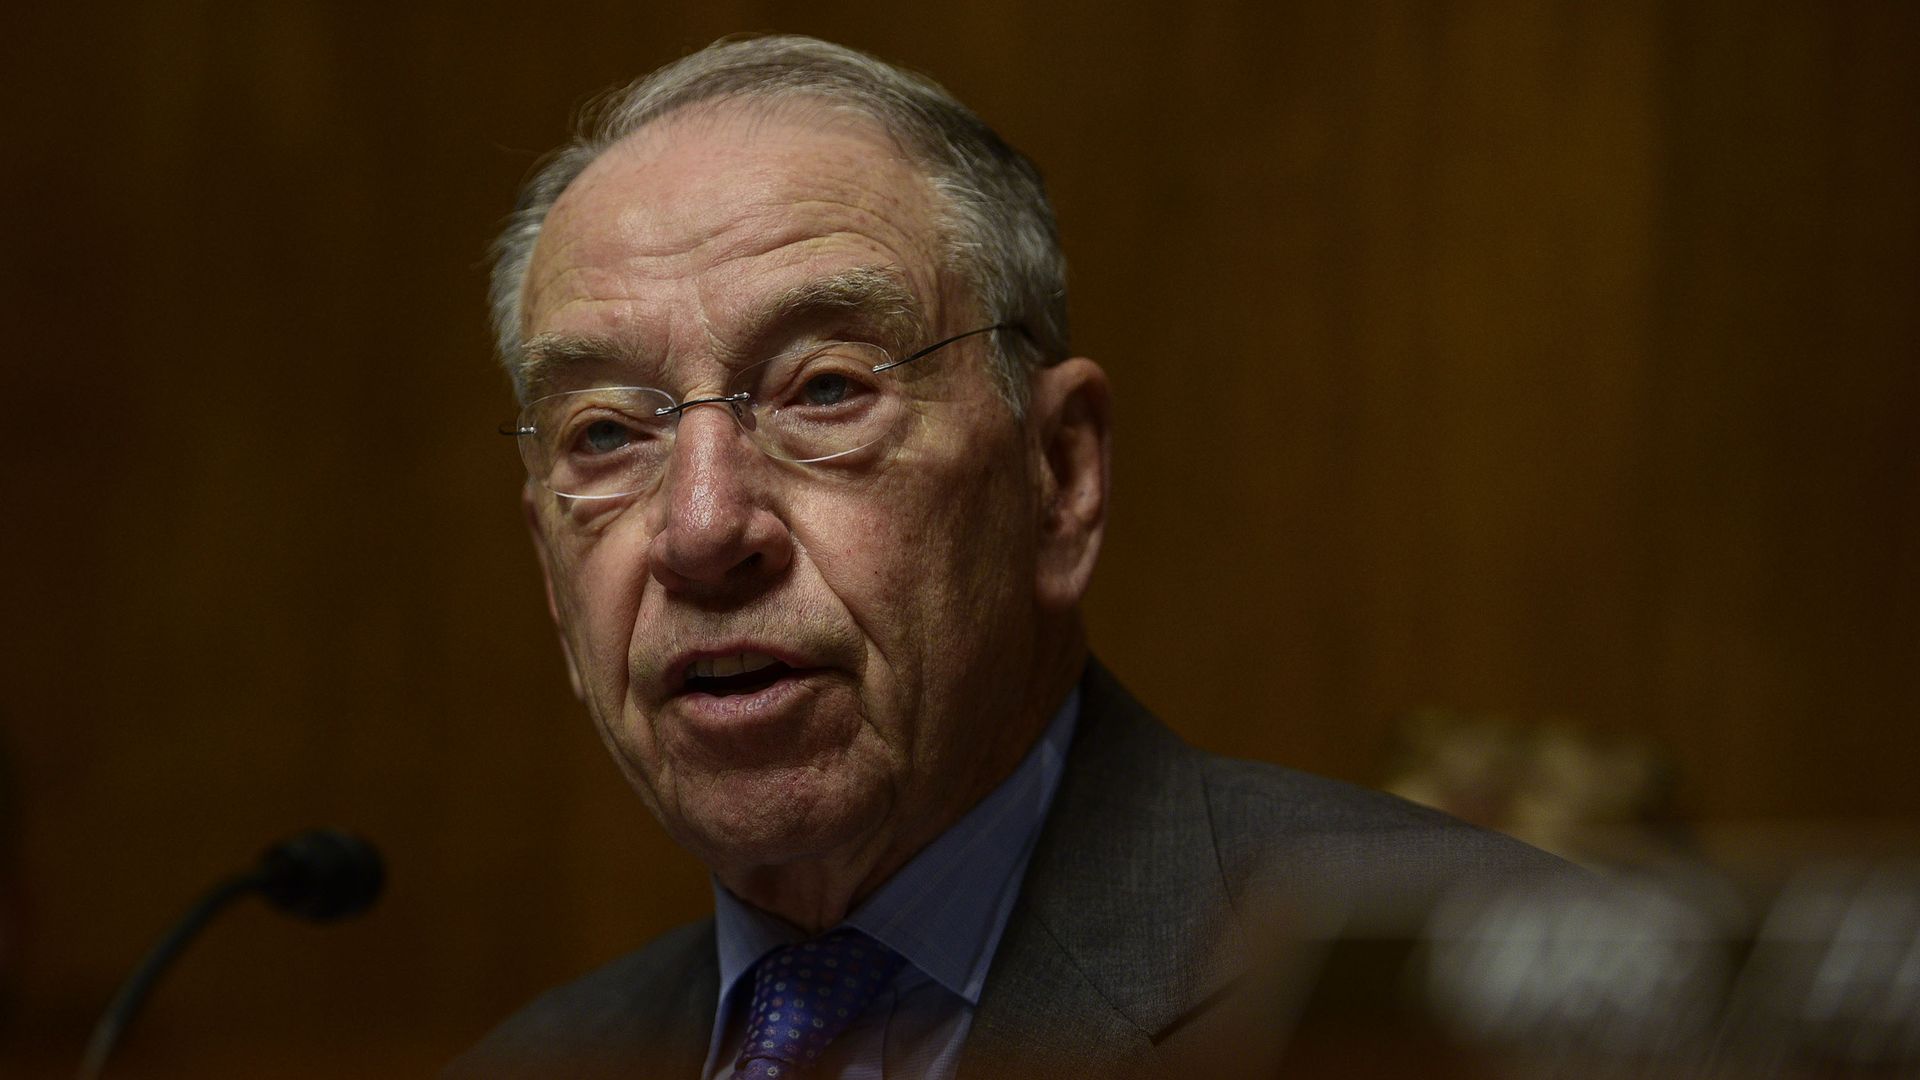  Sen. Chuck Grassley (R-IA), chairman of the Senate Judiciary Committee. Photo: Leigh Vogel/WireImage